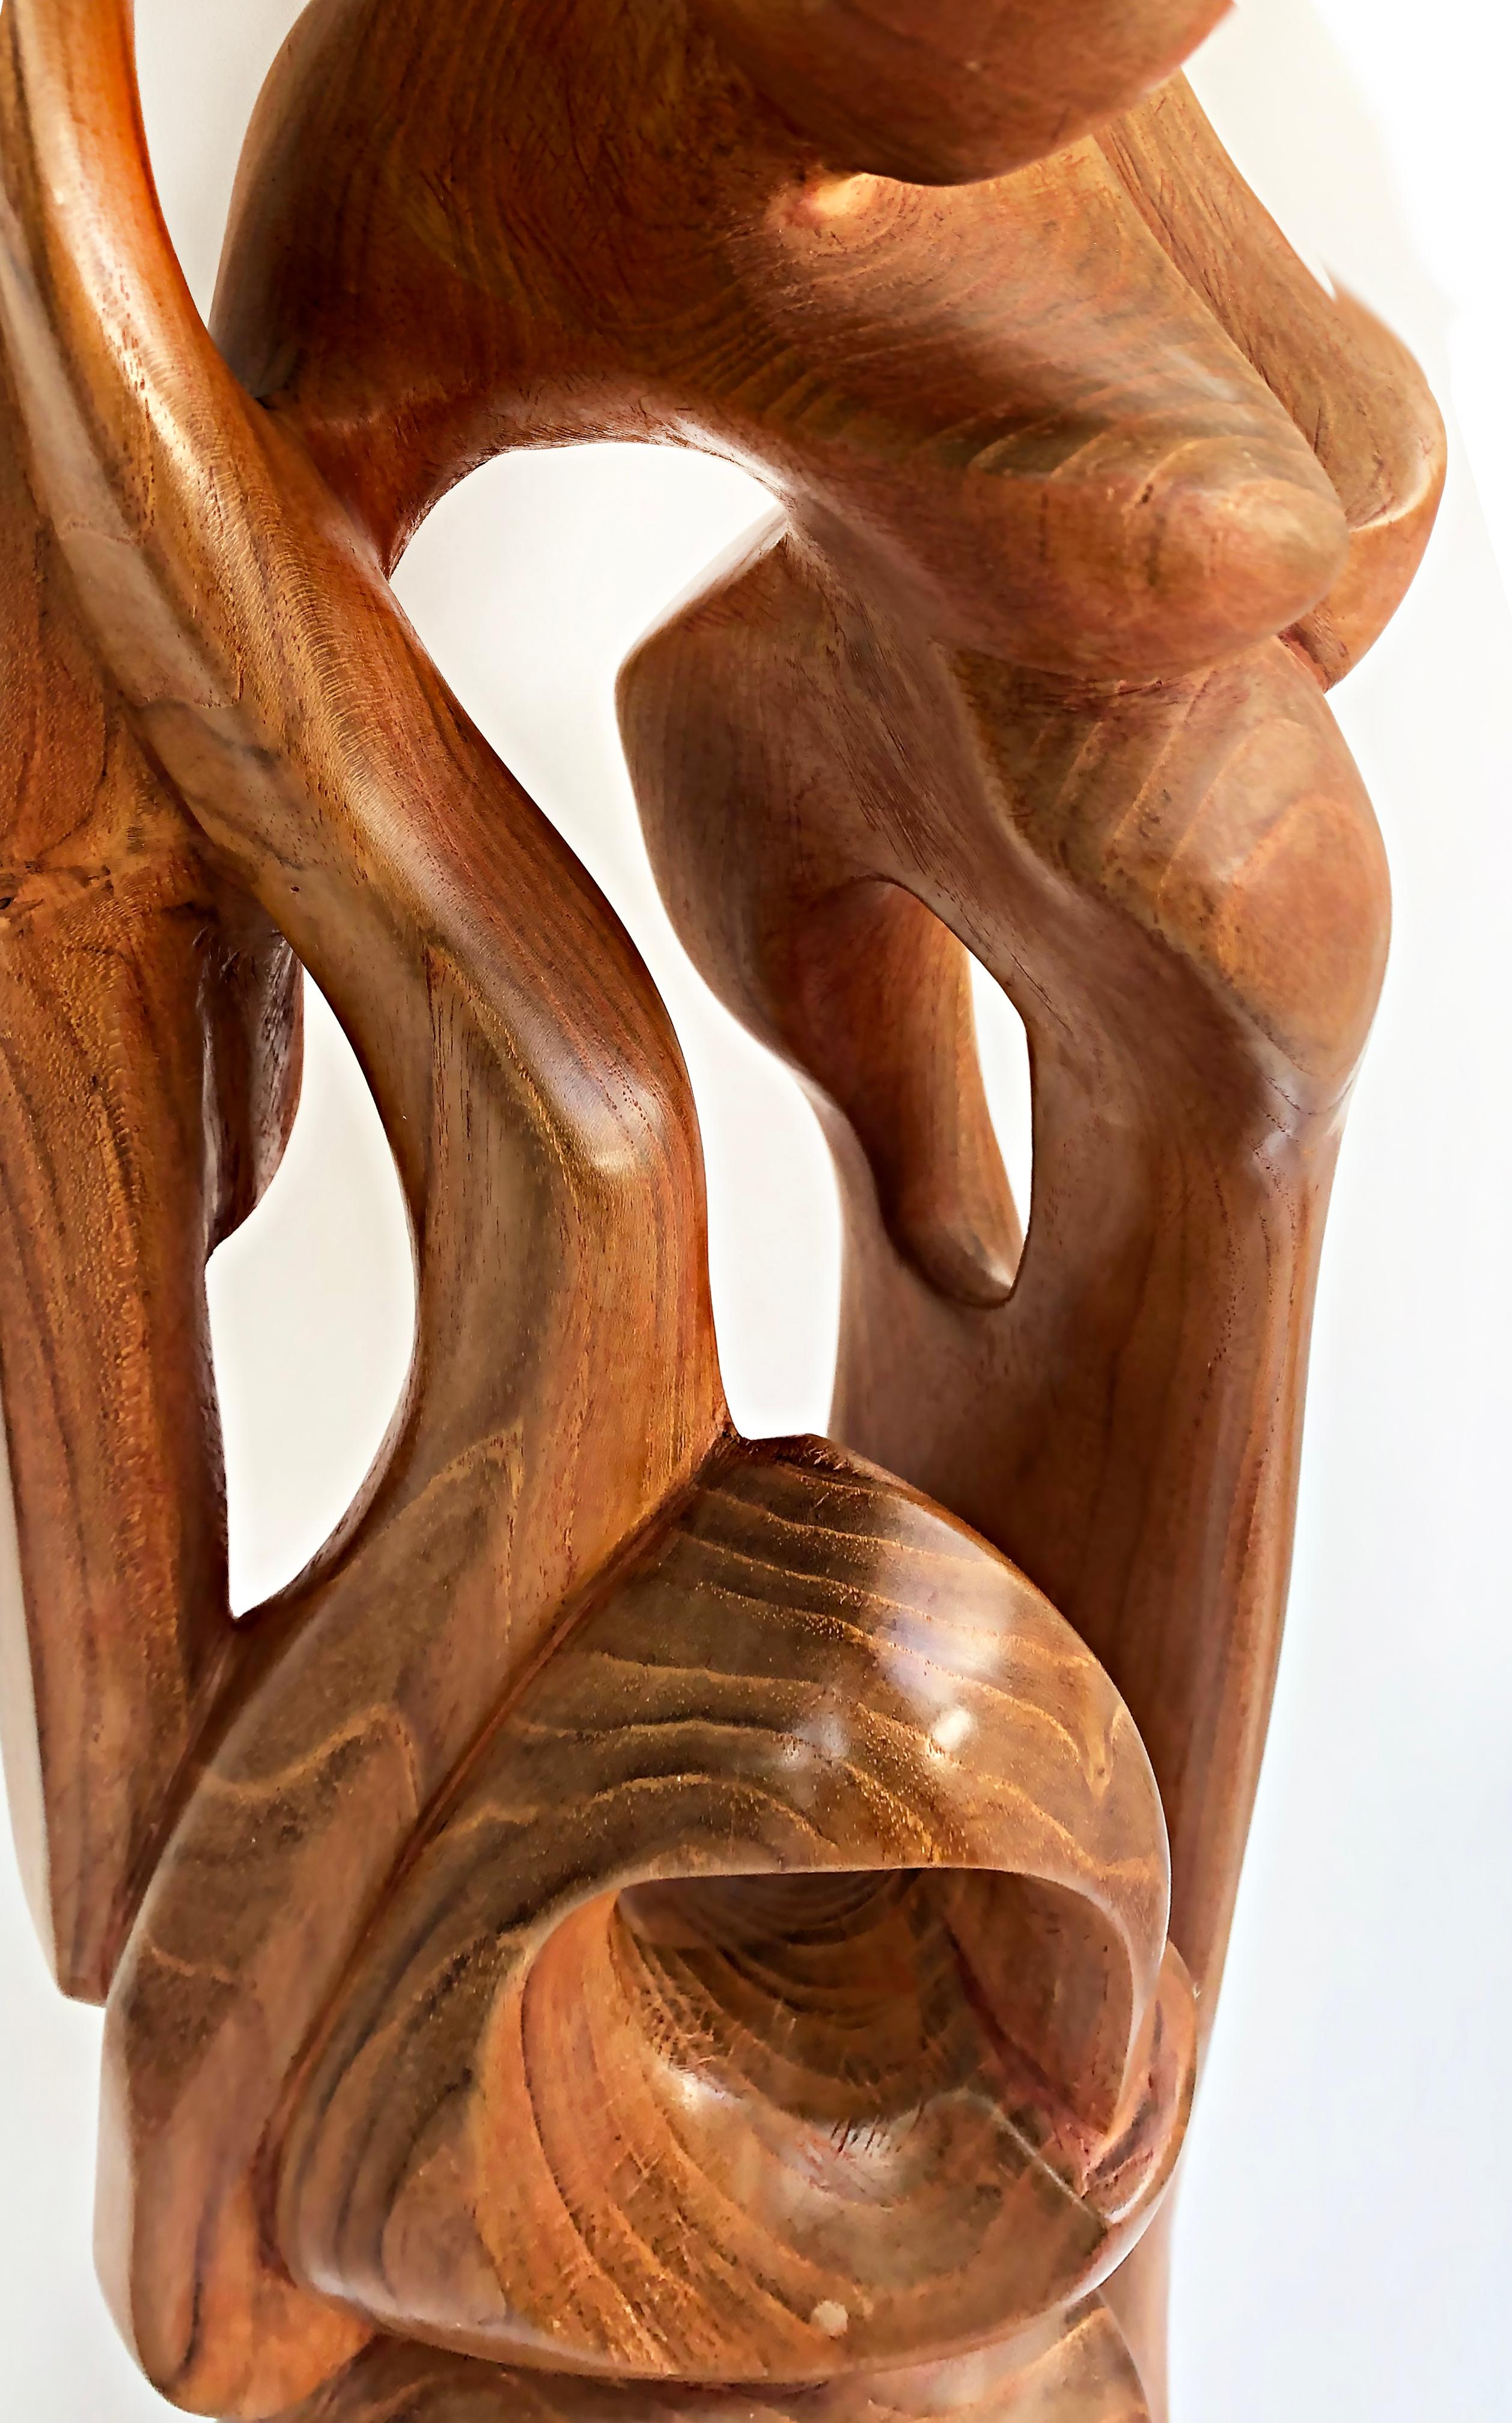 Contemporary Tall Carved Teak Sculpture by Ramon Barales, Cuban American Artist, 2003 For Sale